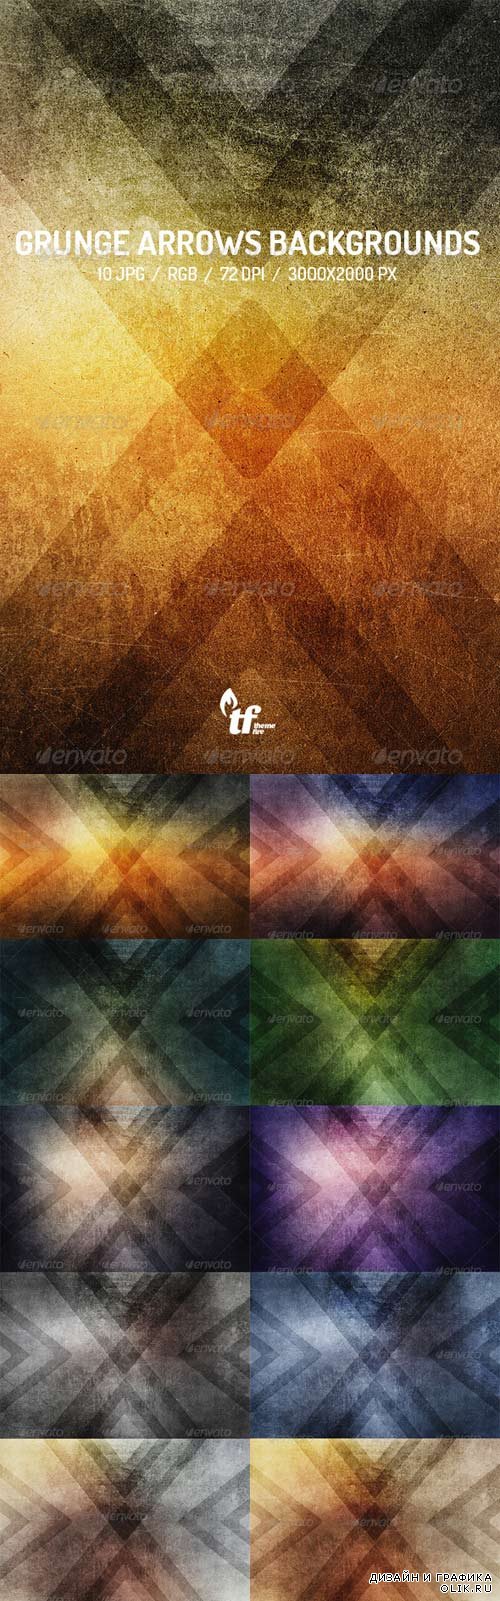 Grunge Arrows Backgrounds